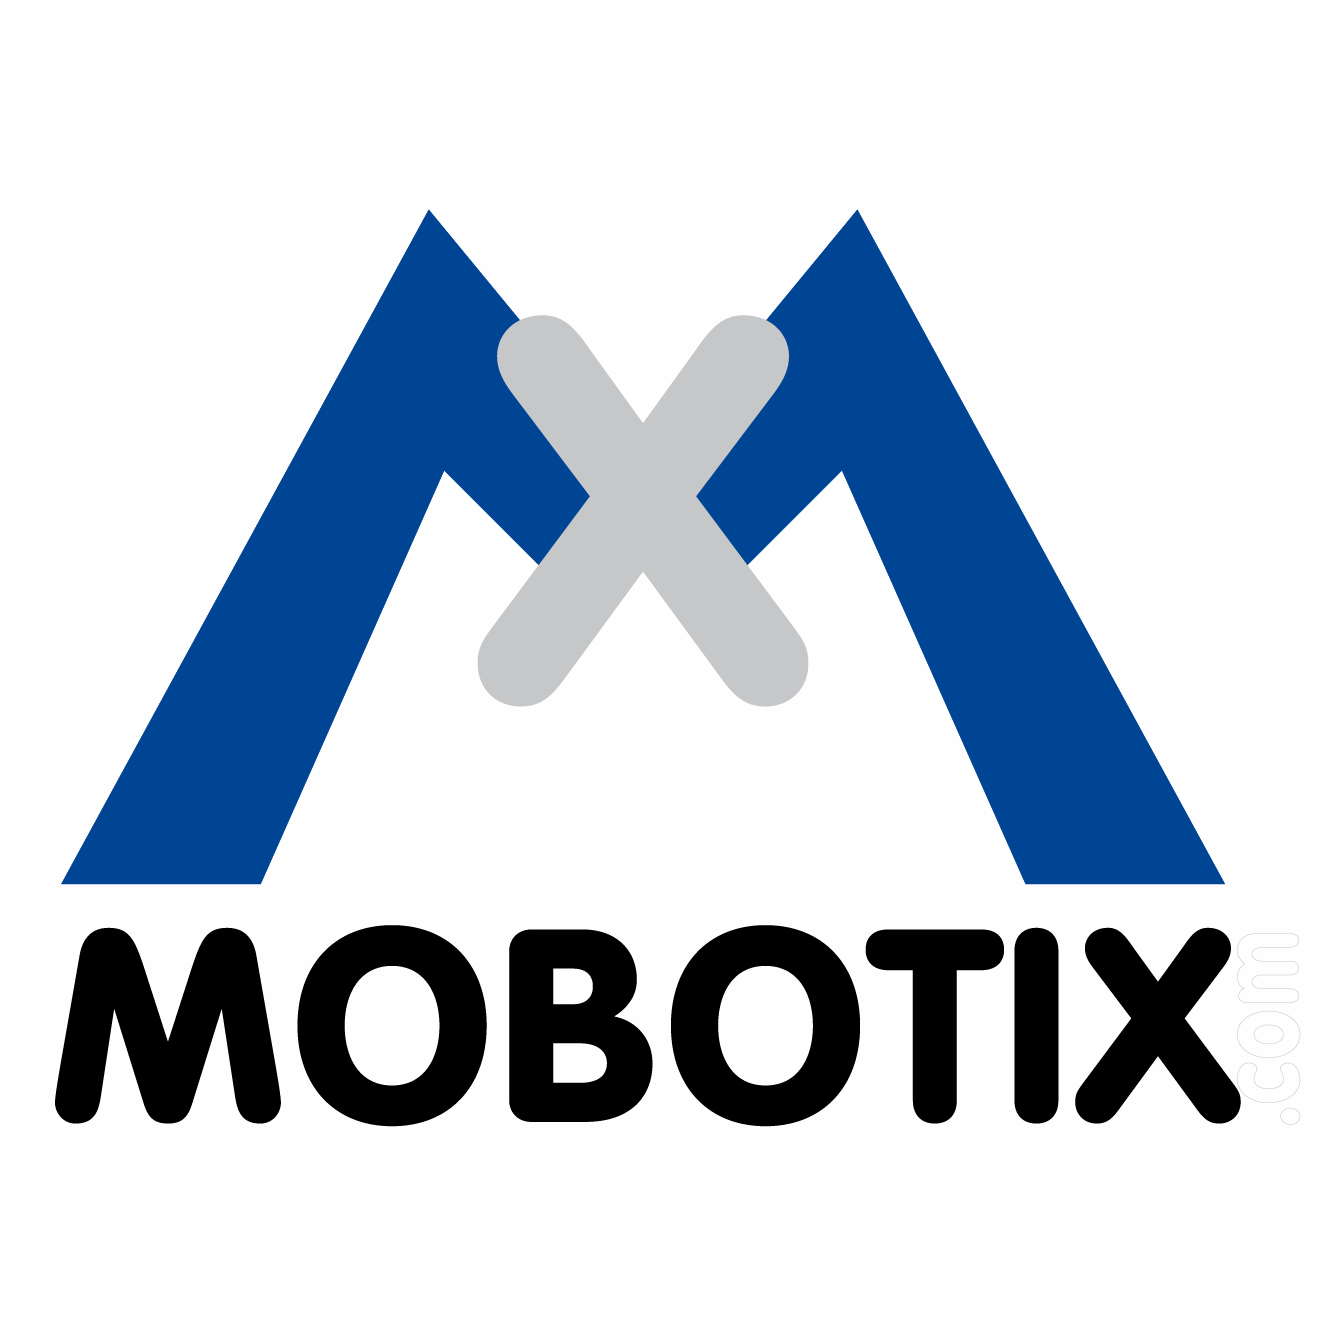 http://securetech.ae/wp-content/uploads/2019/02/22.MOBOTIX.png